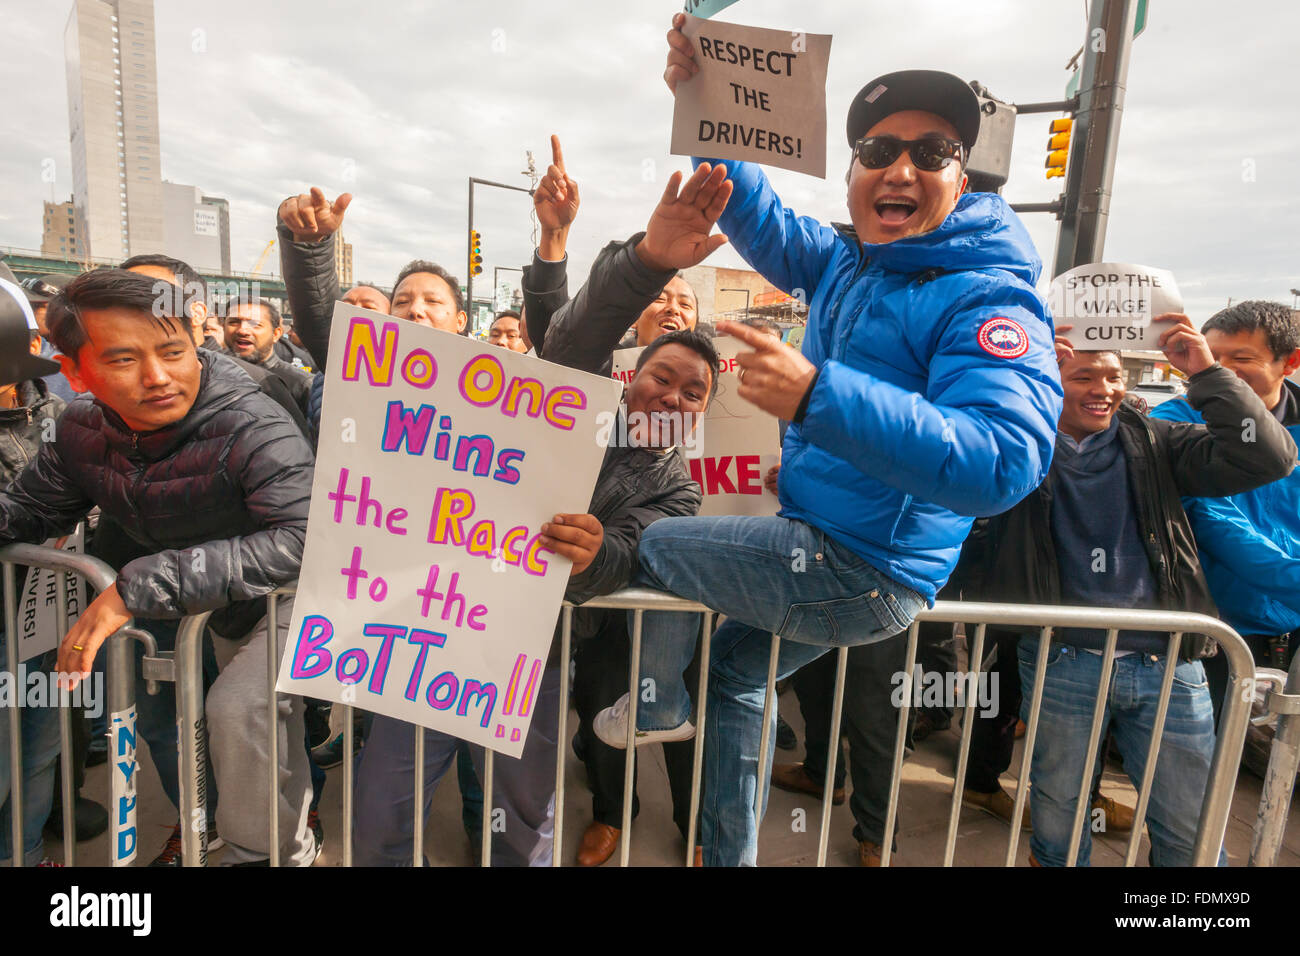 New York, USA. 1st February, 2016. Several hundred Uber drivers and their supporters strike in front of Uber's Queens offices in New York on Monday, February 1, 2016. The drivers are upset over Uber's recent 15% cut in fares meaning less money for the drivers. Uber claims that the cut will increase volume and the drivers will have less down-time. Credit:  Richard Levine/Alamy Live News Stock Photo